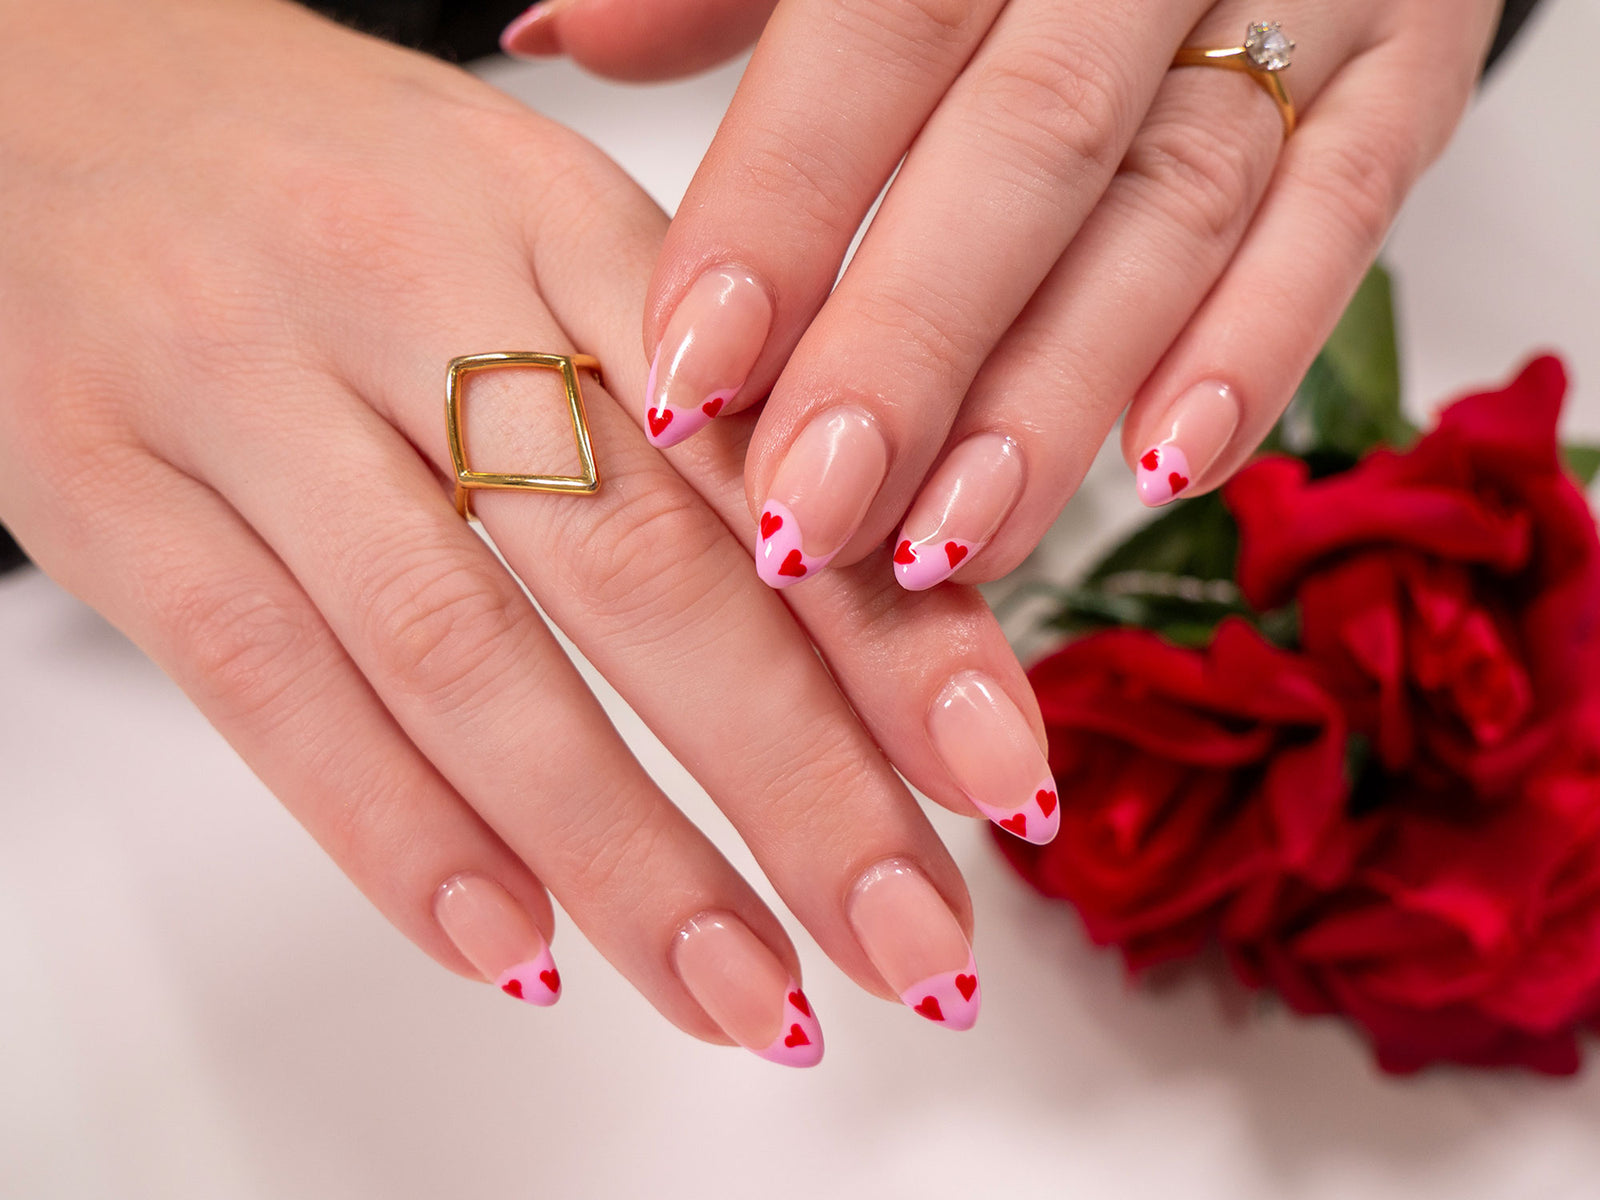 55 Red Valentine's Day Nails To Glam Up For Your Date - GlowingFem